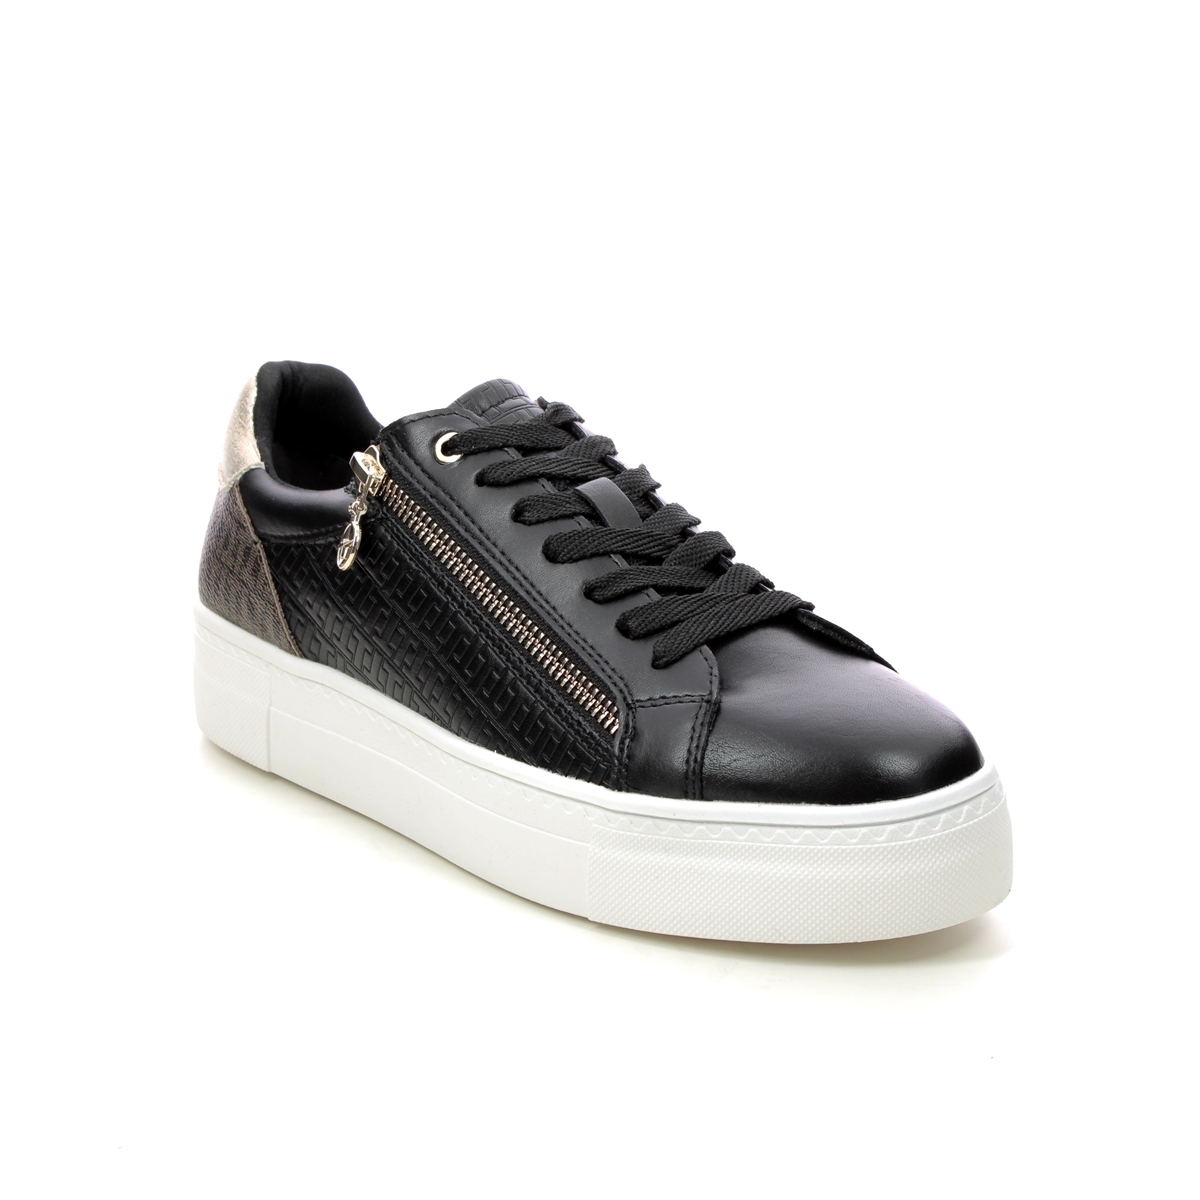 Tamaris Lima Zip Black Womens trainers 23313-20-097 in a Plain Man-made in Size 39